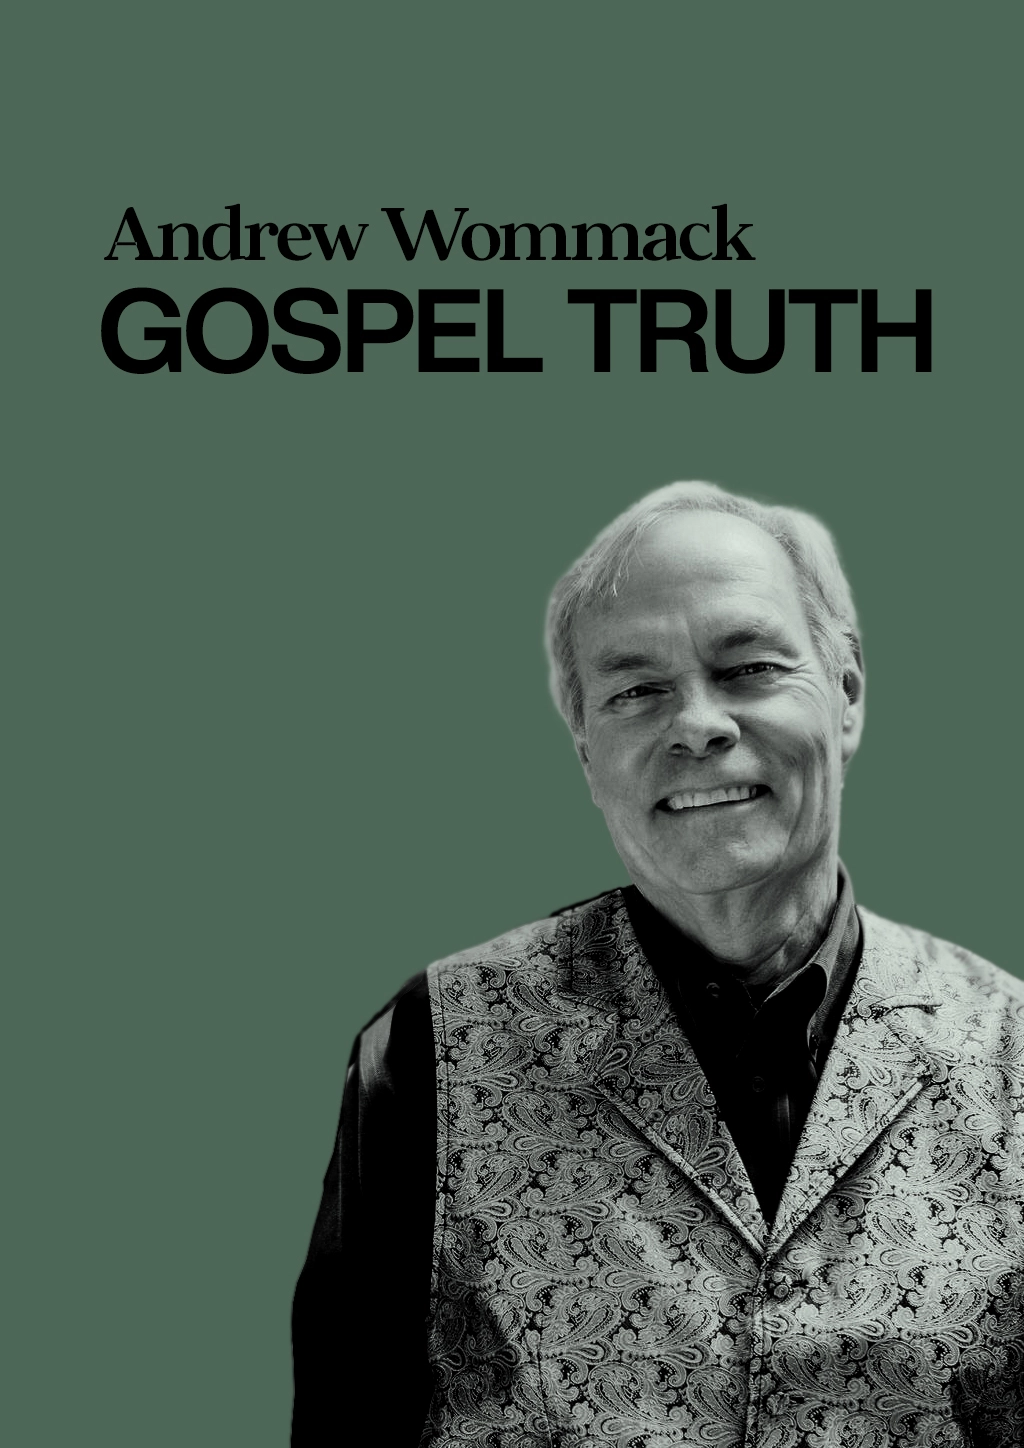 Andrew Wommack Ministry Card on GOD TV.